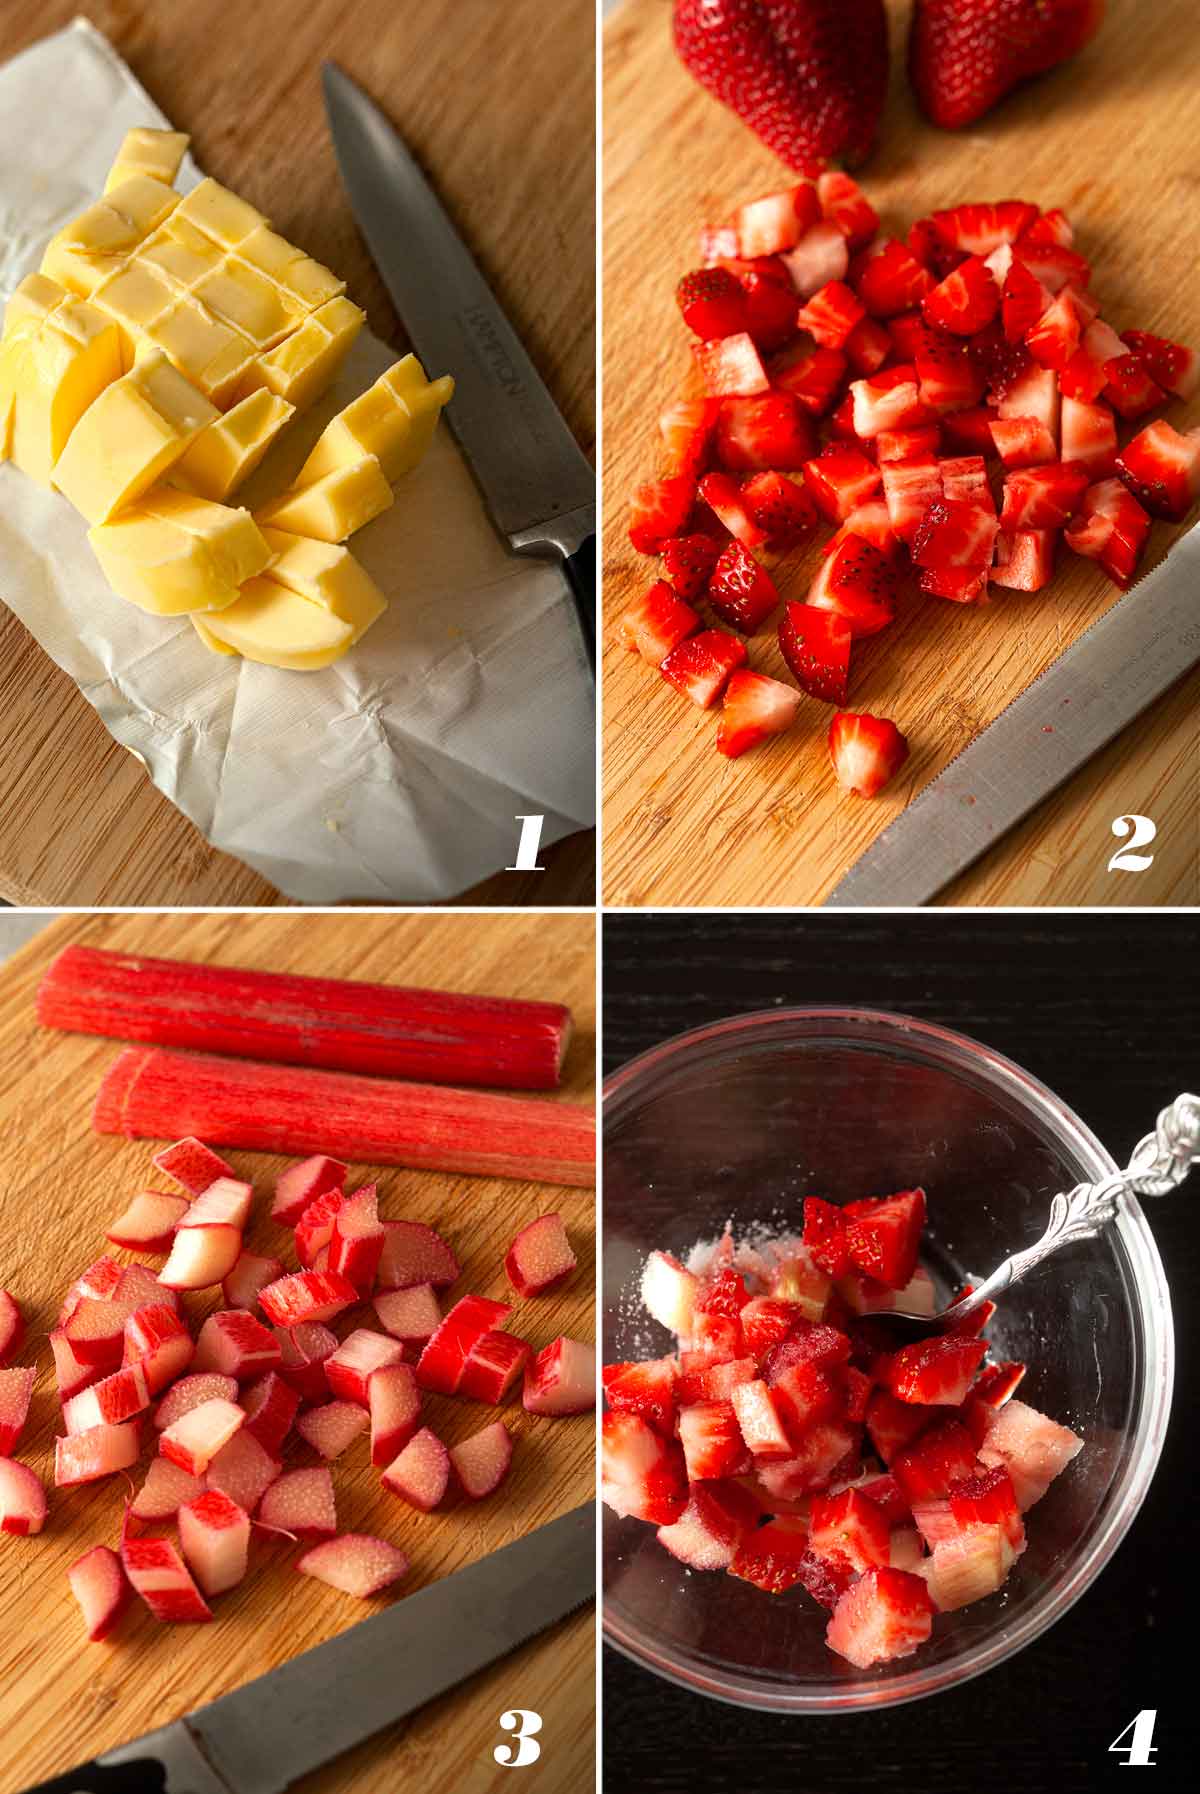 A collage of 4 images showing how to prepare butter and fruit for scones.